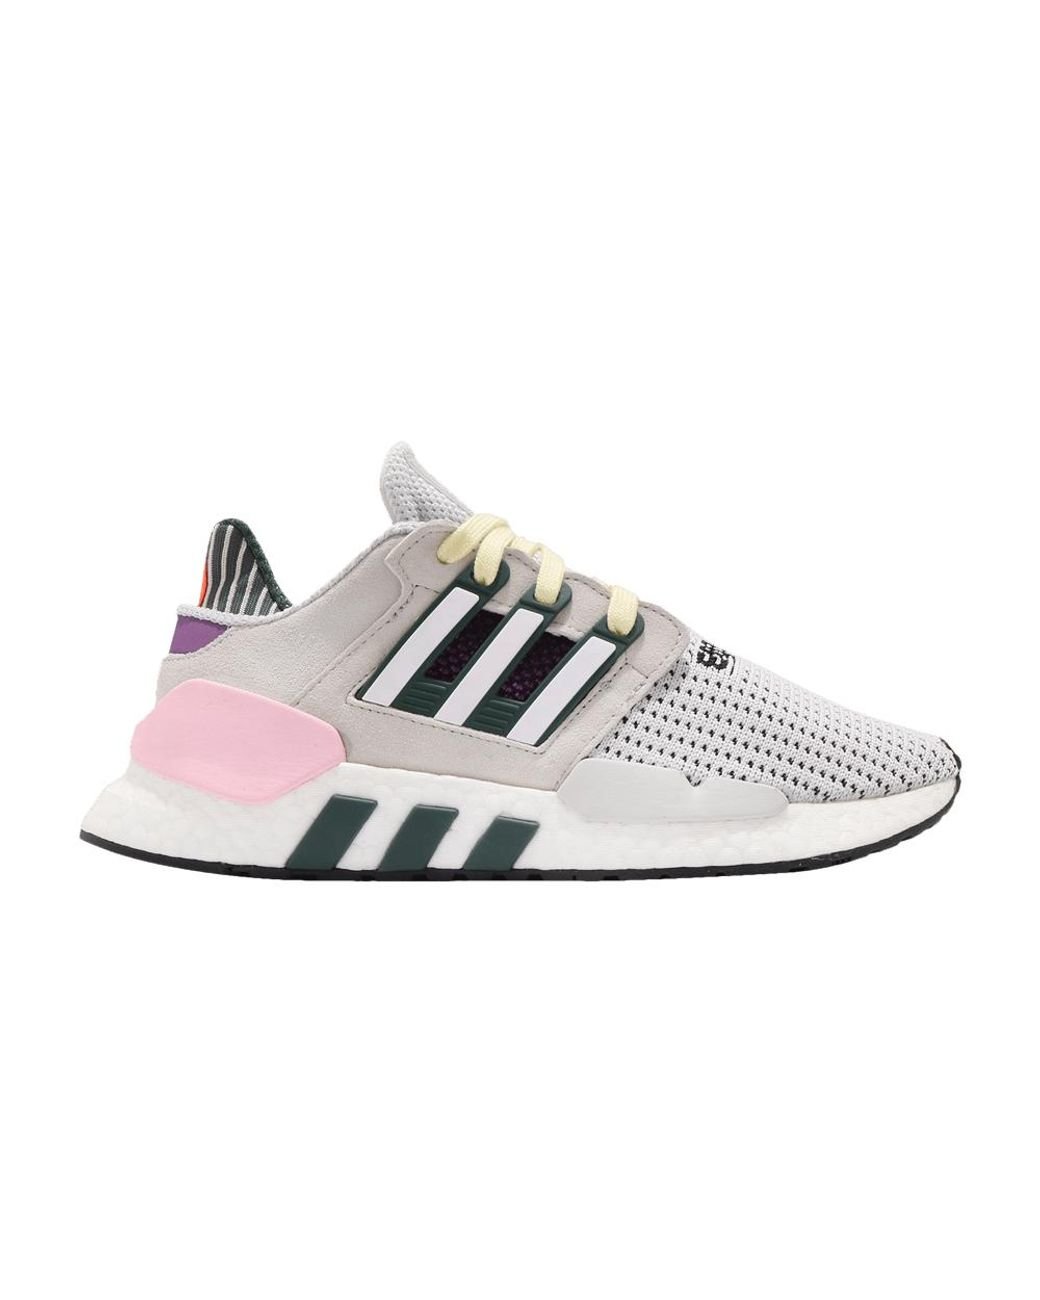 adidas Eqt Support 91/18 'grey Clear Pink' in White | Lyst